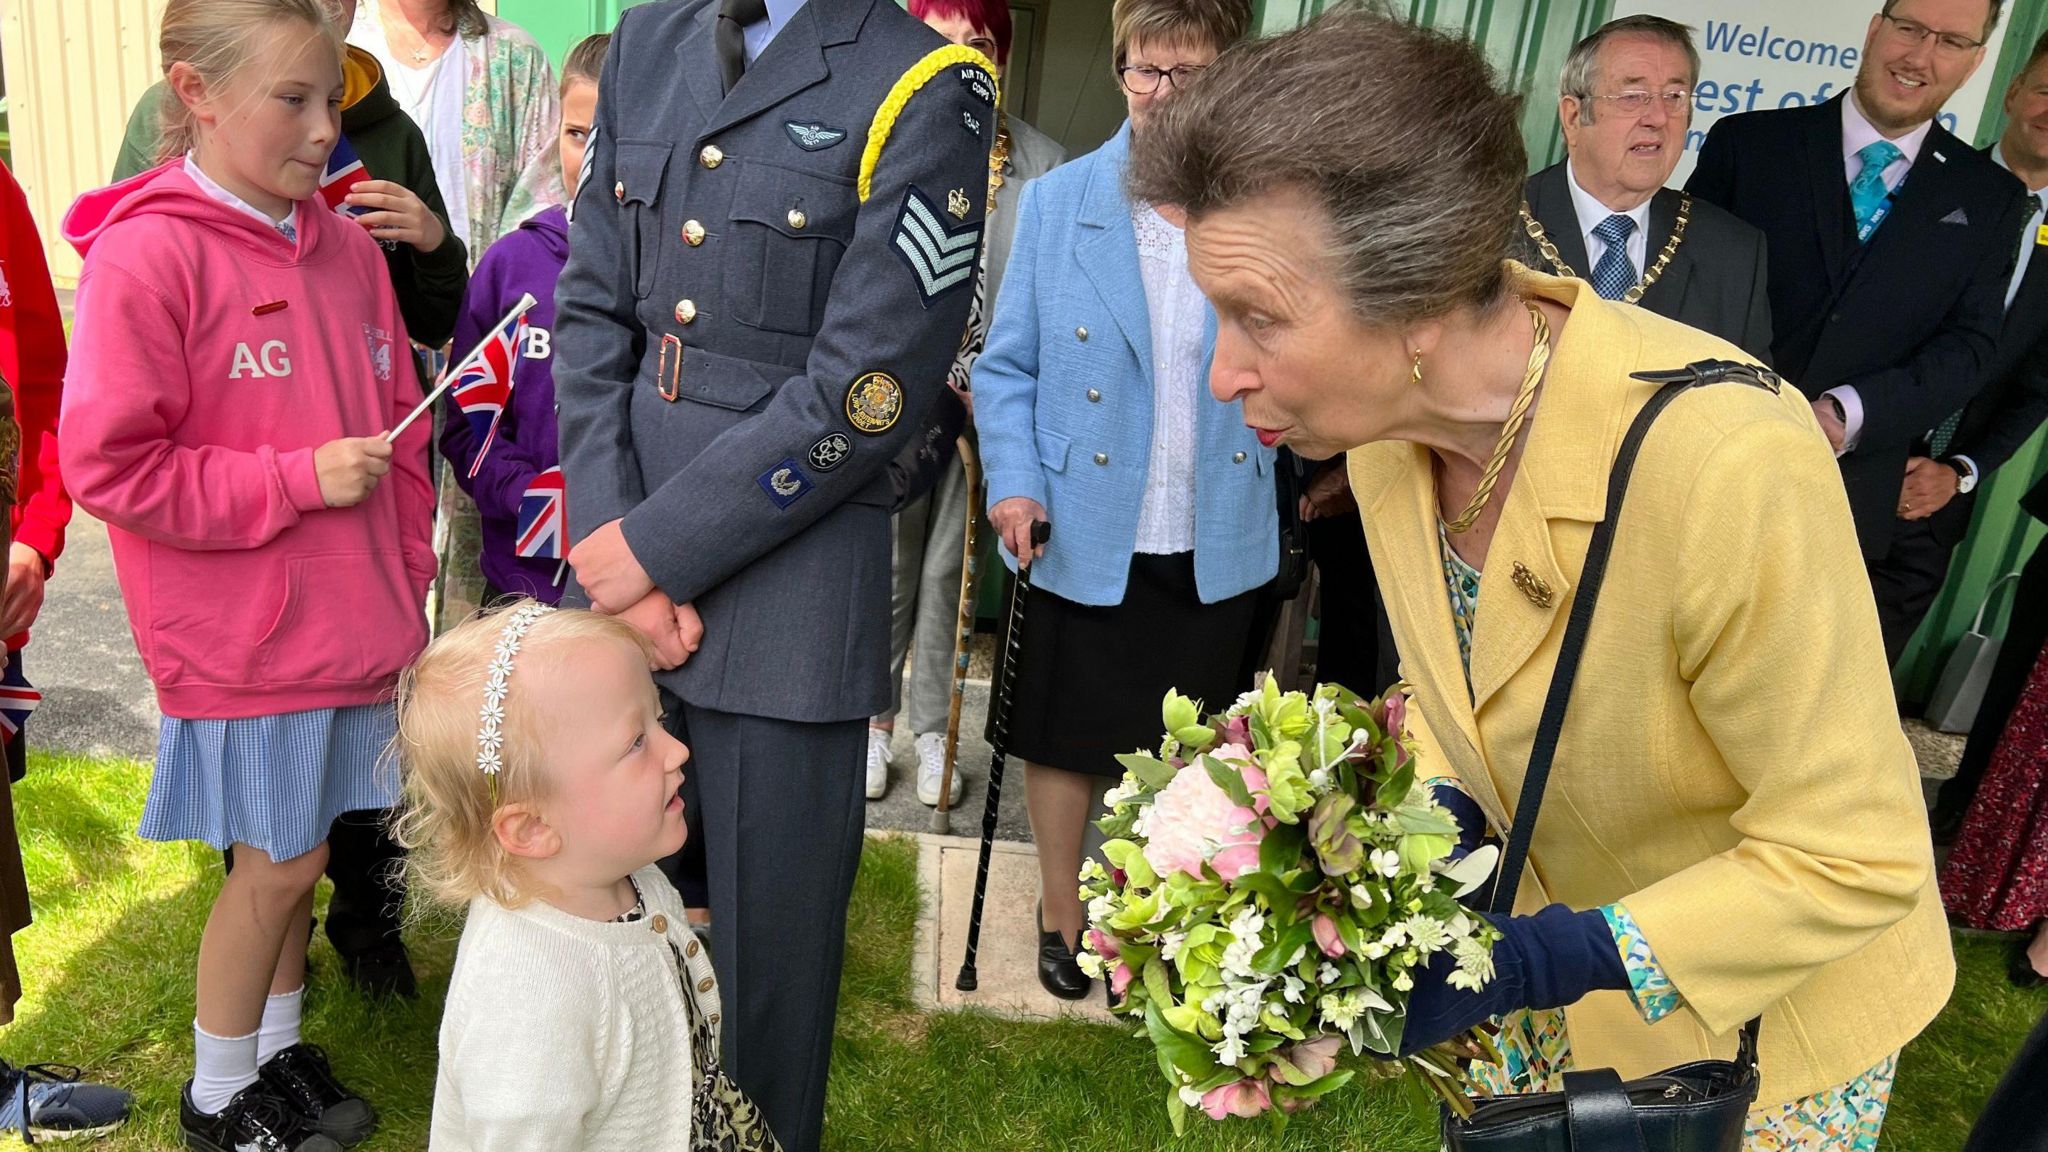 Princess Anne bending down to speak to a little girl while holding flowers